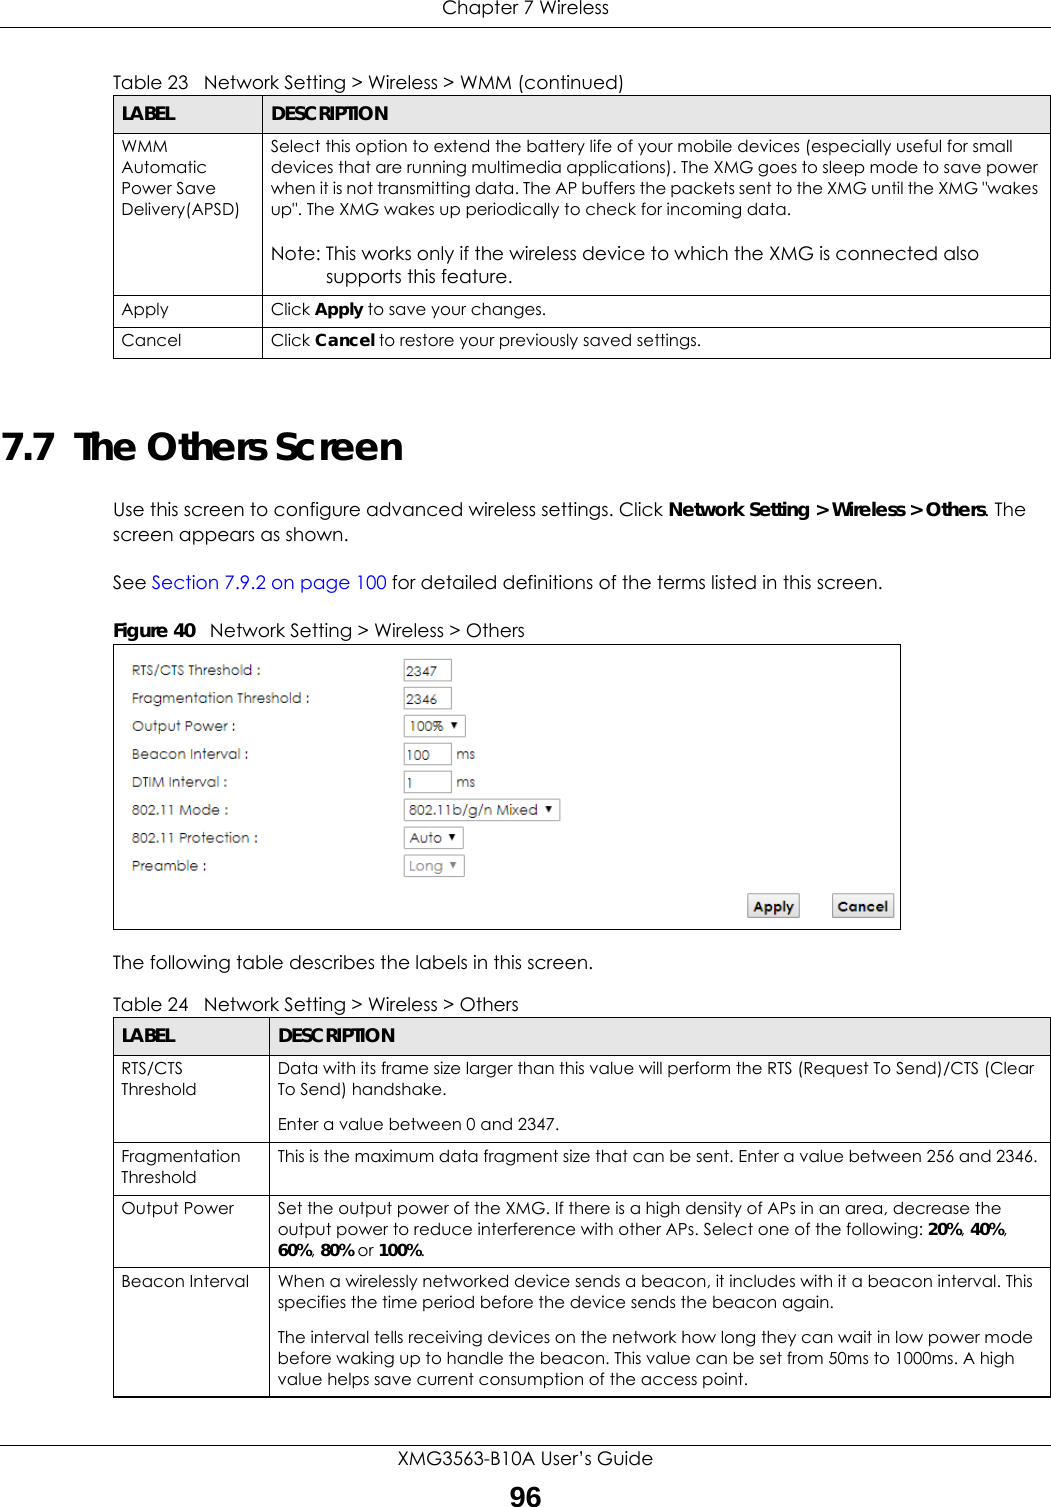 Chapter 7 WirelessXMG3563-B10A User’s Guide967.7  The Others ScreenUse this screen to configure advanced wireless settings. Click Network Setting &gt; Wireless &gt; Others. The screen appears as shown.See Section 7.9.2 on page 100 for detailed definitions of the terms listed in this screen.Figure 40   Network Setting &gt; Wireless &gt; OthersThe following table describes the labels in this screen. WMM Automatic Power Save Delivery(APSD)Select this option to extend the battery life of your mobile devices (especially useful for small devices that are running multimedia applications). The XMG goes to sleep mode to save power when it is not transmitting data. The AP buffers the packets sent to the XMG until the XMG &quot;wakes up&quot;. The XMG wakes up periodically to check for incoming data.Note: This works only if the wireless device to which the XMG is connected also supports this feature.Apply Click Apply to save your changes.Cancel Click Cancel to restore your previously saved settings.Table 23   Network Setting &gt; Wireless &gt; WMM (continued)LABEL DESCRIPTIONTable 24   Network Setting &gt; Wireless &gt; OthersLABEL DESCRIPTIONRTS/CTS ThresholdData with its frame size larger than this value will perform the RTS (Request To Send)/CTS (Clear To Send) handshake. Enter a value between 0 and 2347. Fragmentation ThresholdThis is the maximum data fragment size that can be sent. Enter a value between 256 and 2346. Output Power Set the output power of the XMG. If there is a high density of APs in an area, decrease the output power to reduce interference with other APs. Select one of the following: 20%, 40%, 60%, 80% or 100%. Beacon Interval When a wirelessly networked device sends a beacon, it includes with it a beacon interval. This specifies the time period before the device sends the beacon again.The interval tells receiving devices on the network how long they can wait in low power mode before waking up to handle the beacon. This value can be set from 50ms to 1000ms. A high value helps save current consumption of the access point.